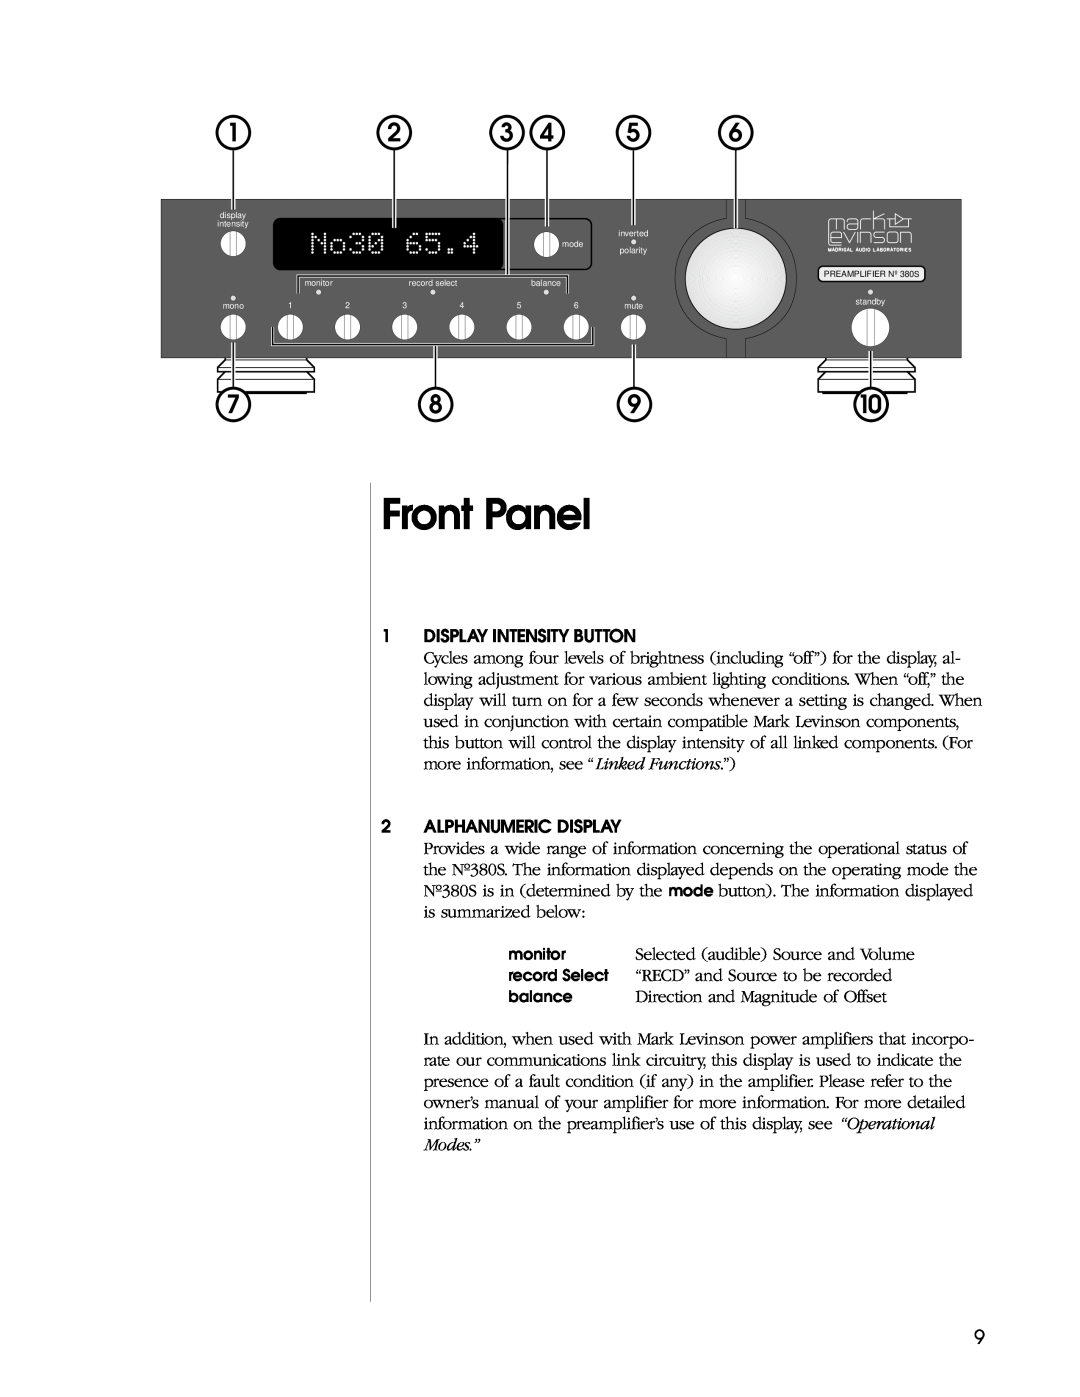 Madrigal Imaging N380S owner manual Front Panel 